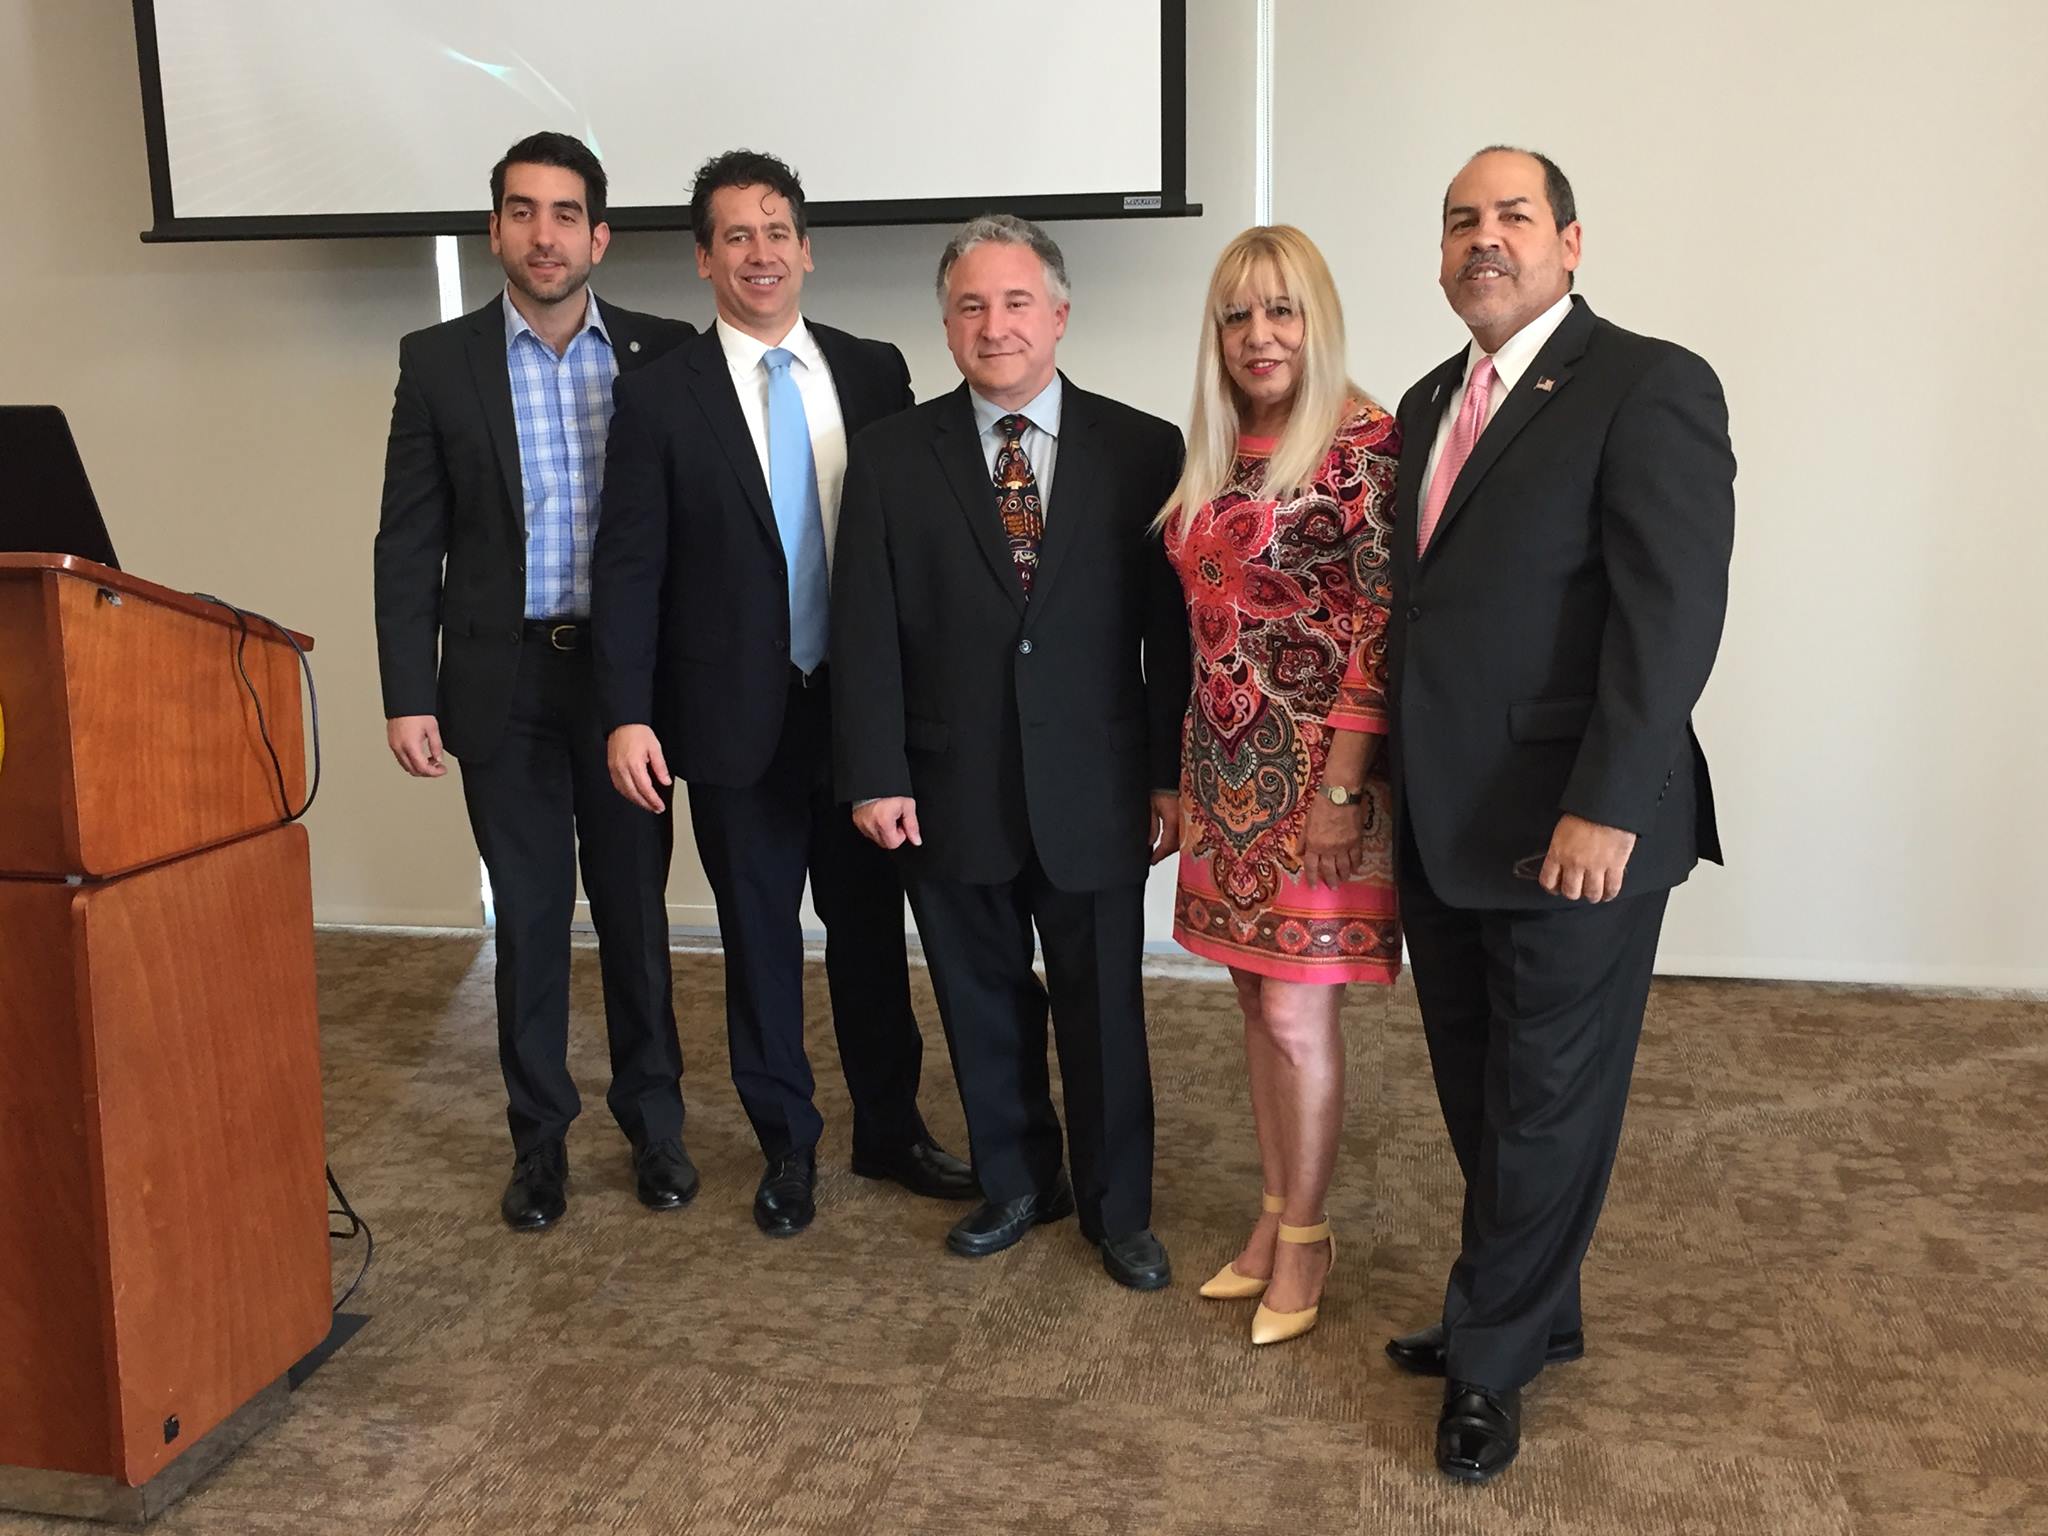 Startup Doral Pipeline, a Doral Chamber of Commerce event.